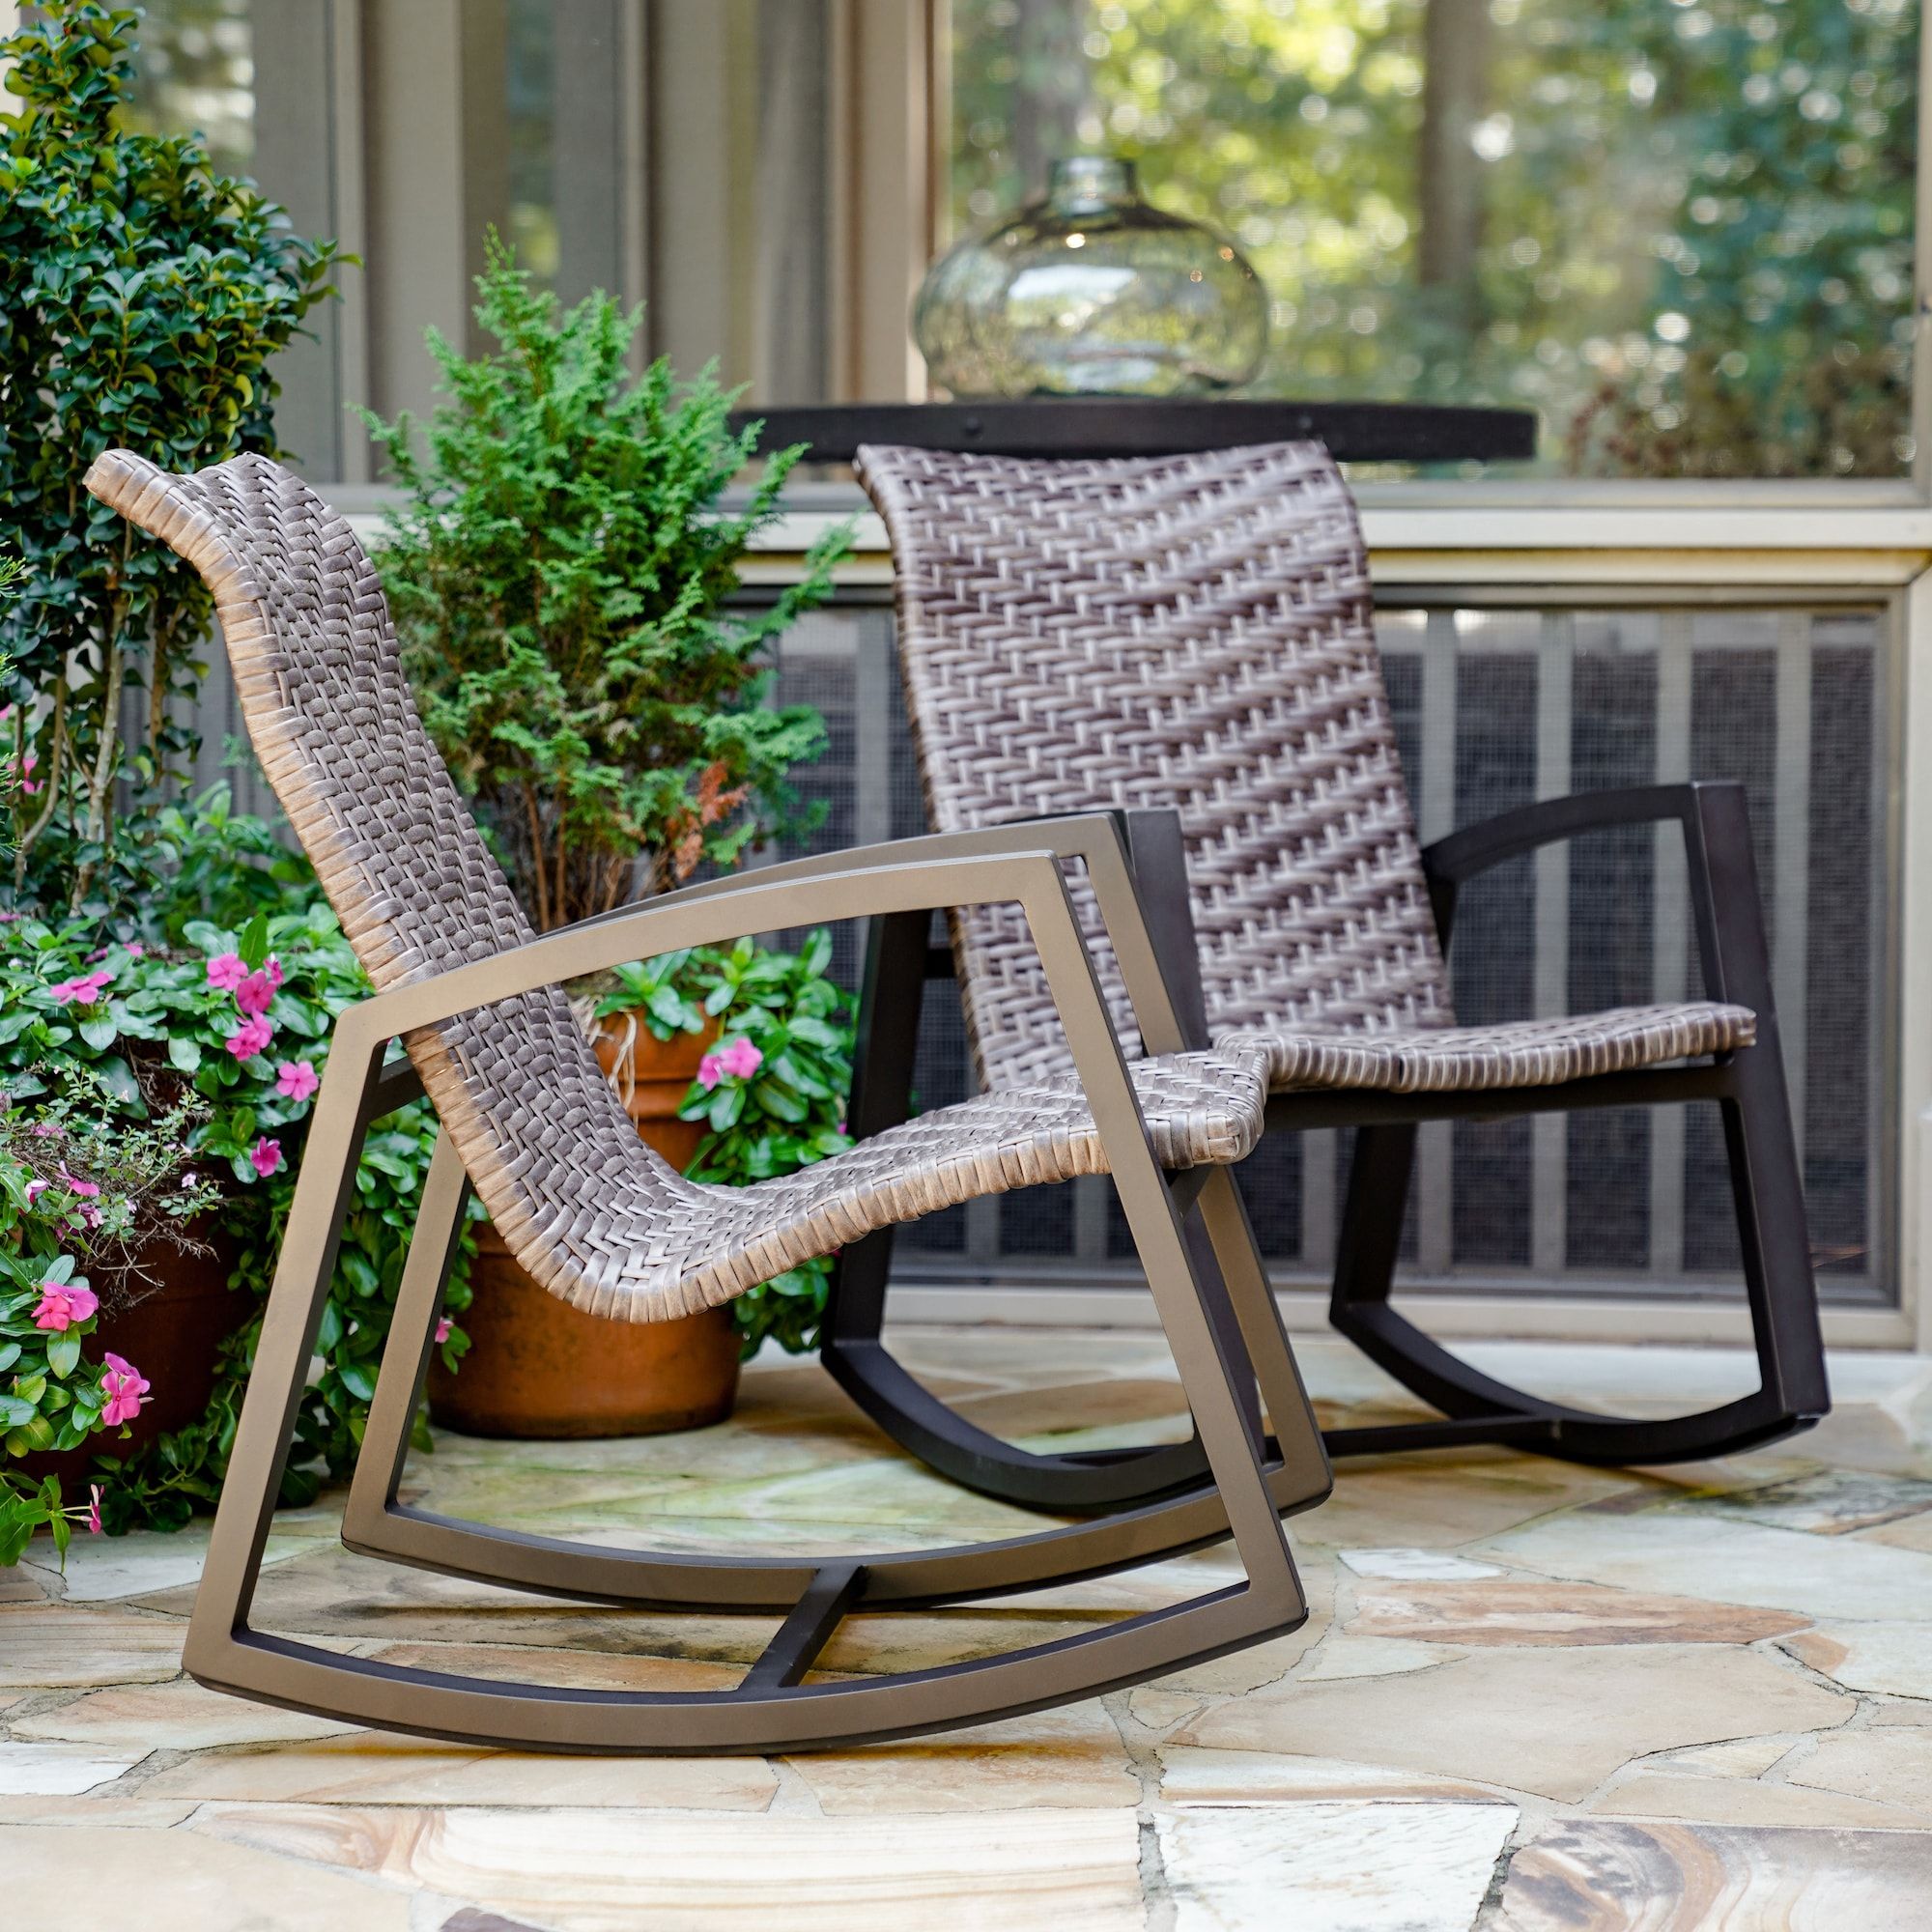 Leisure Made Marion Set Of 2 Wicker Brown Aluminum Frame Rocking Chair(s)  With Woven Seat In The Patio Chairs Department At Lowes Inside Rocking Chairs Wicker Patio Furniture Set (View 6 of 15)